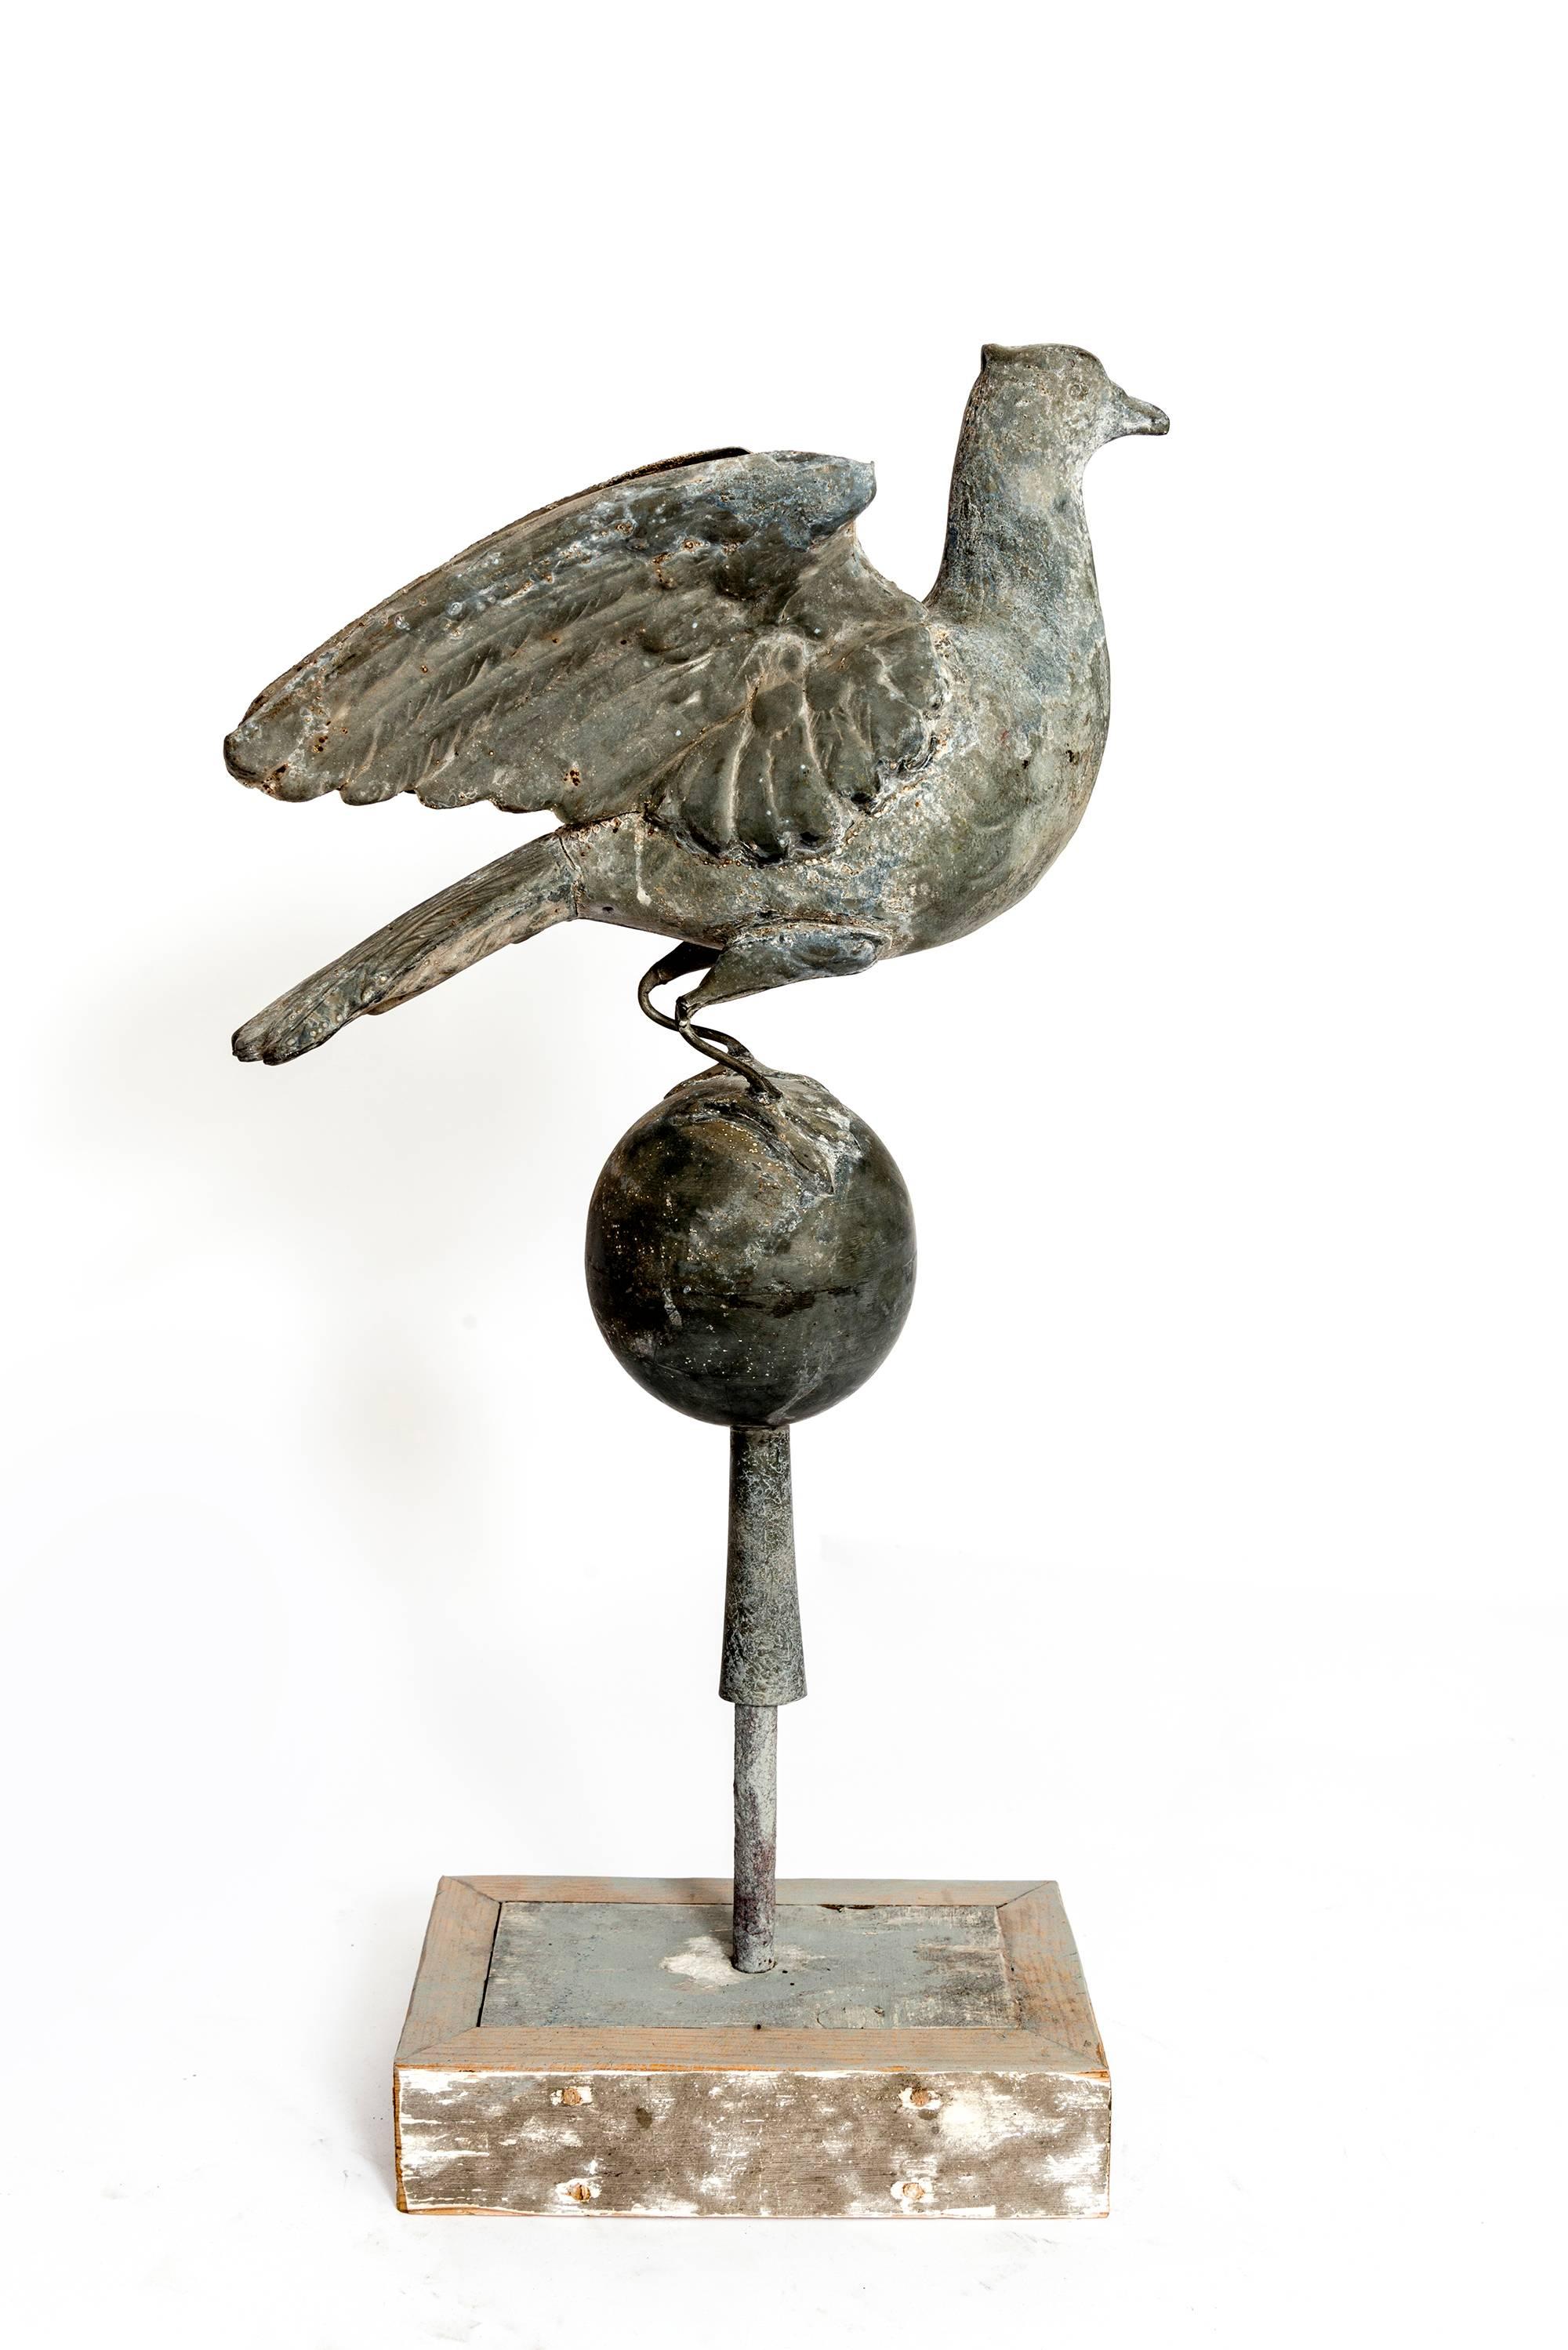 A wonderful rendition of a bird sitting atop a globe and set on a wooden stand. Great detail and patina of this vintage decorative piece.